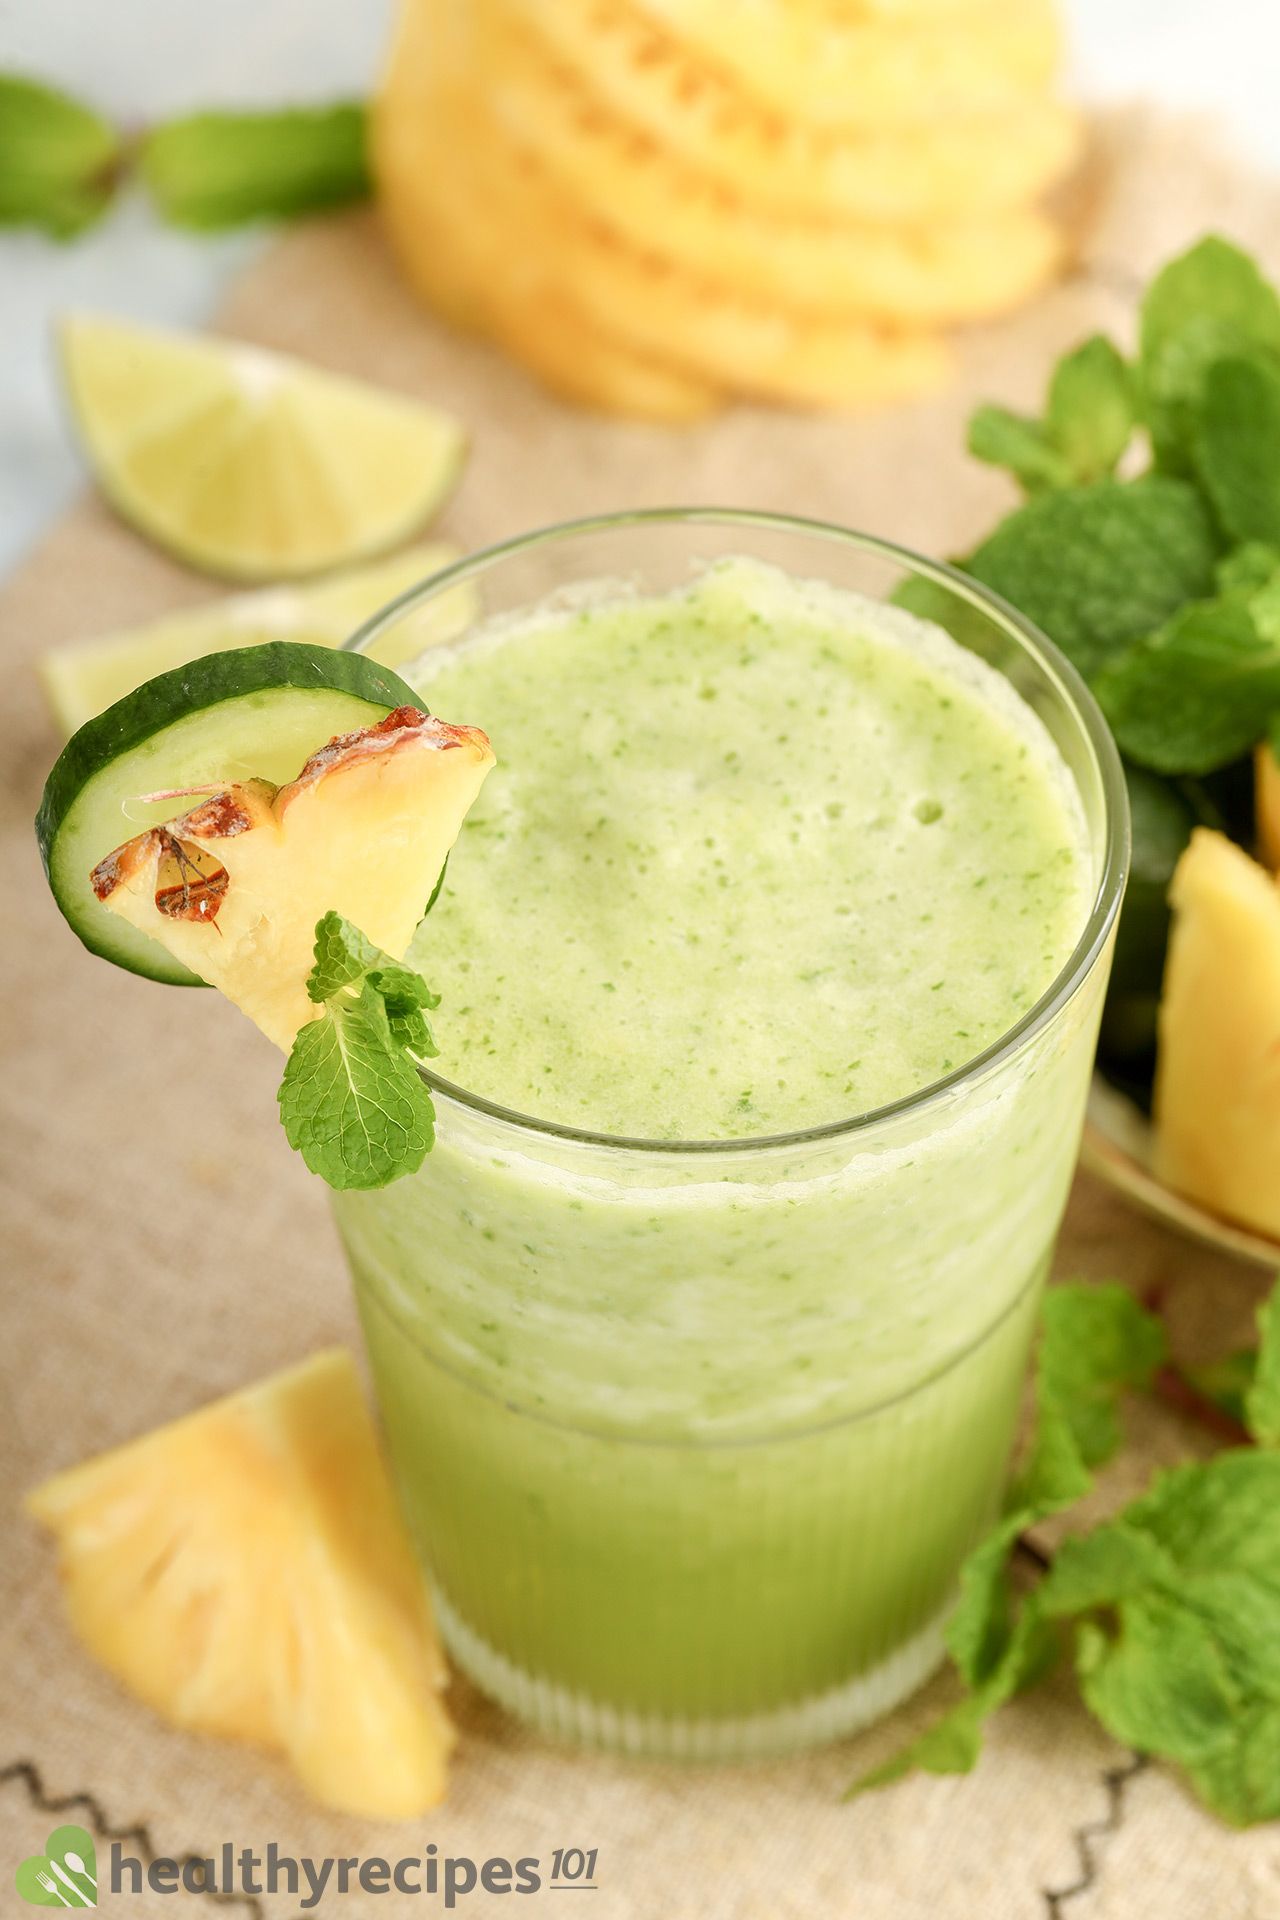 How Long Does Cucumber Pineapple Smoothie Last